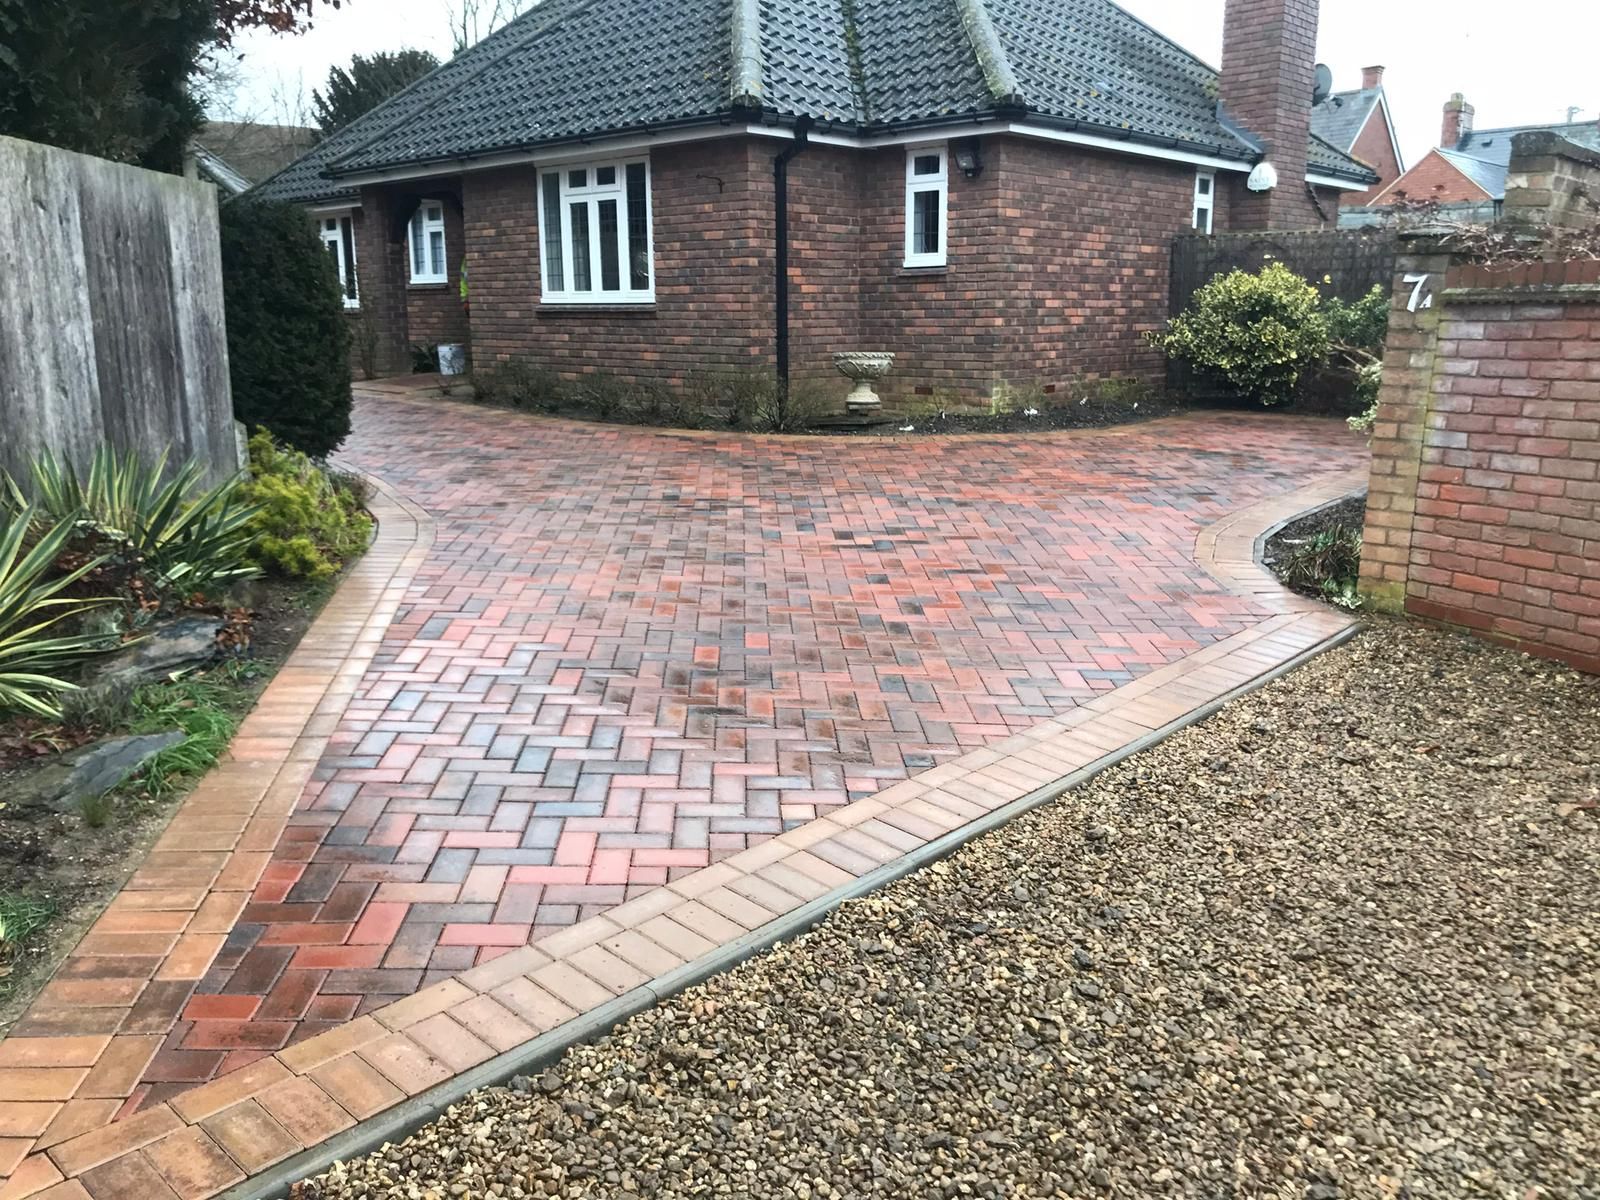 Milton Keynes block paving specialists Quality Drives and Patios install block paving driveways and patios throughout Buckinghamshire, Bedfordshire, Hertfordshire and Northamptonshire